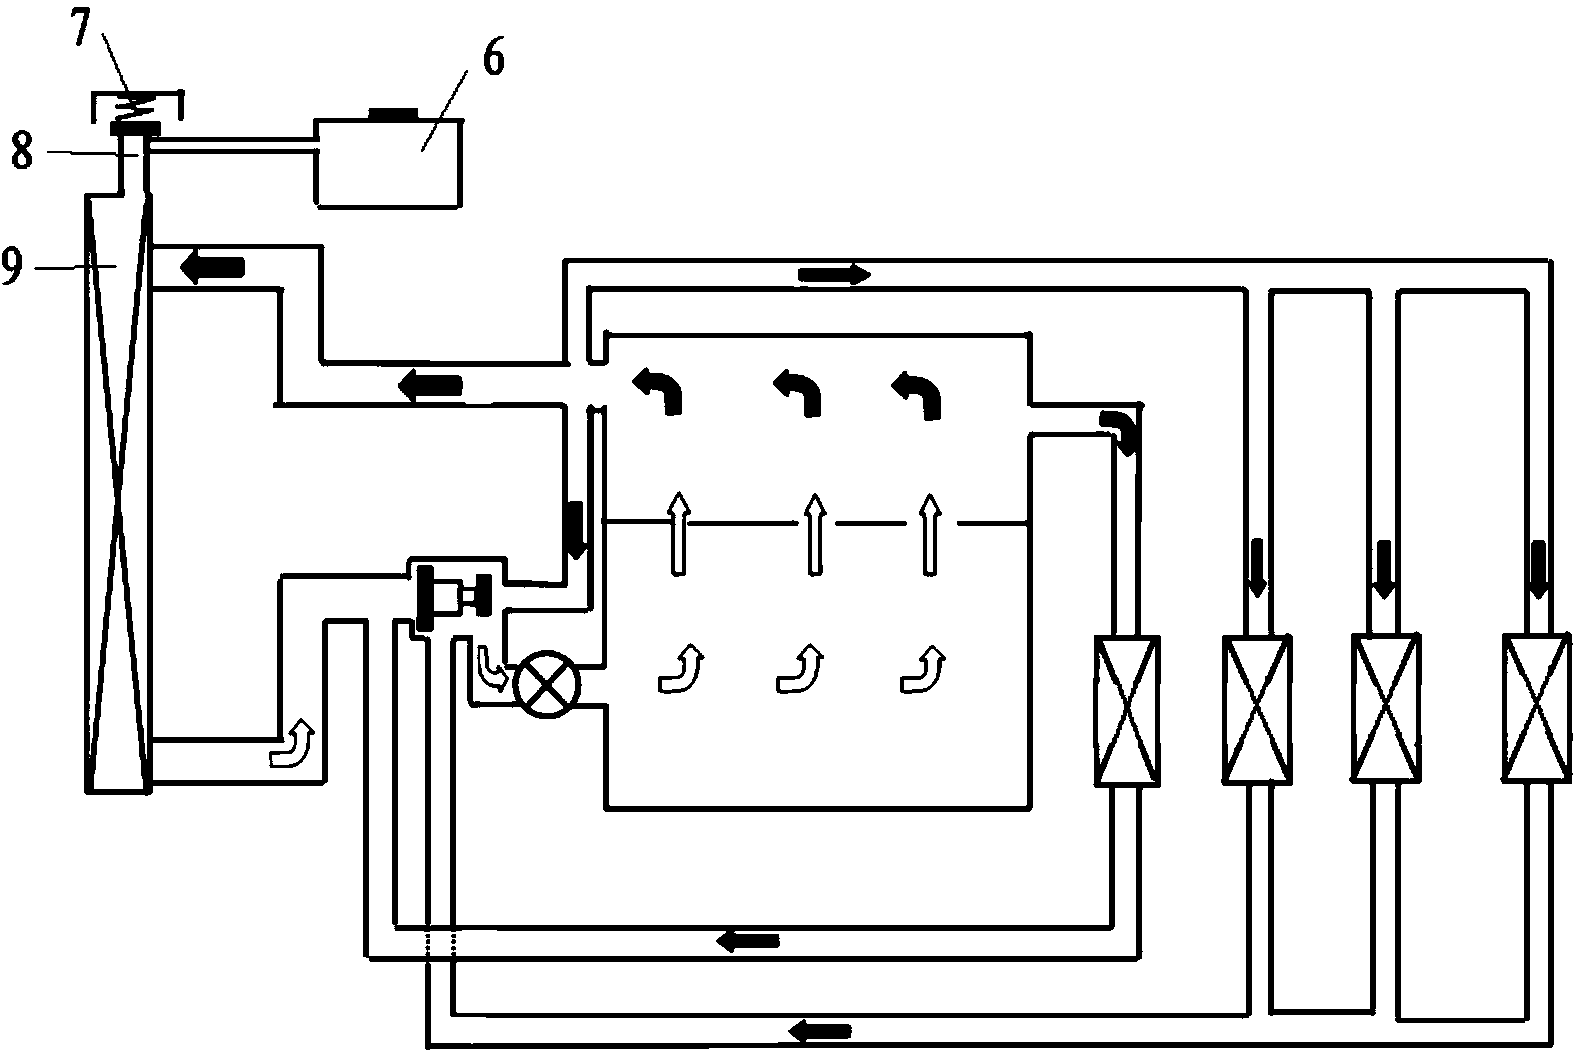 Expansion tank assembly and cooling circulation system